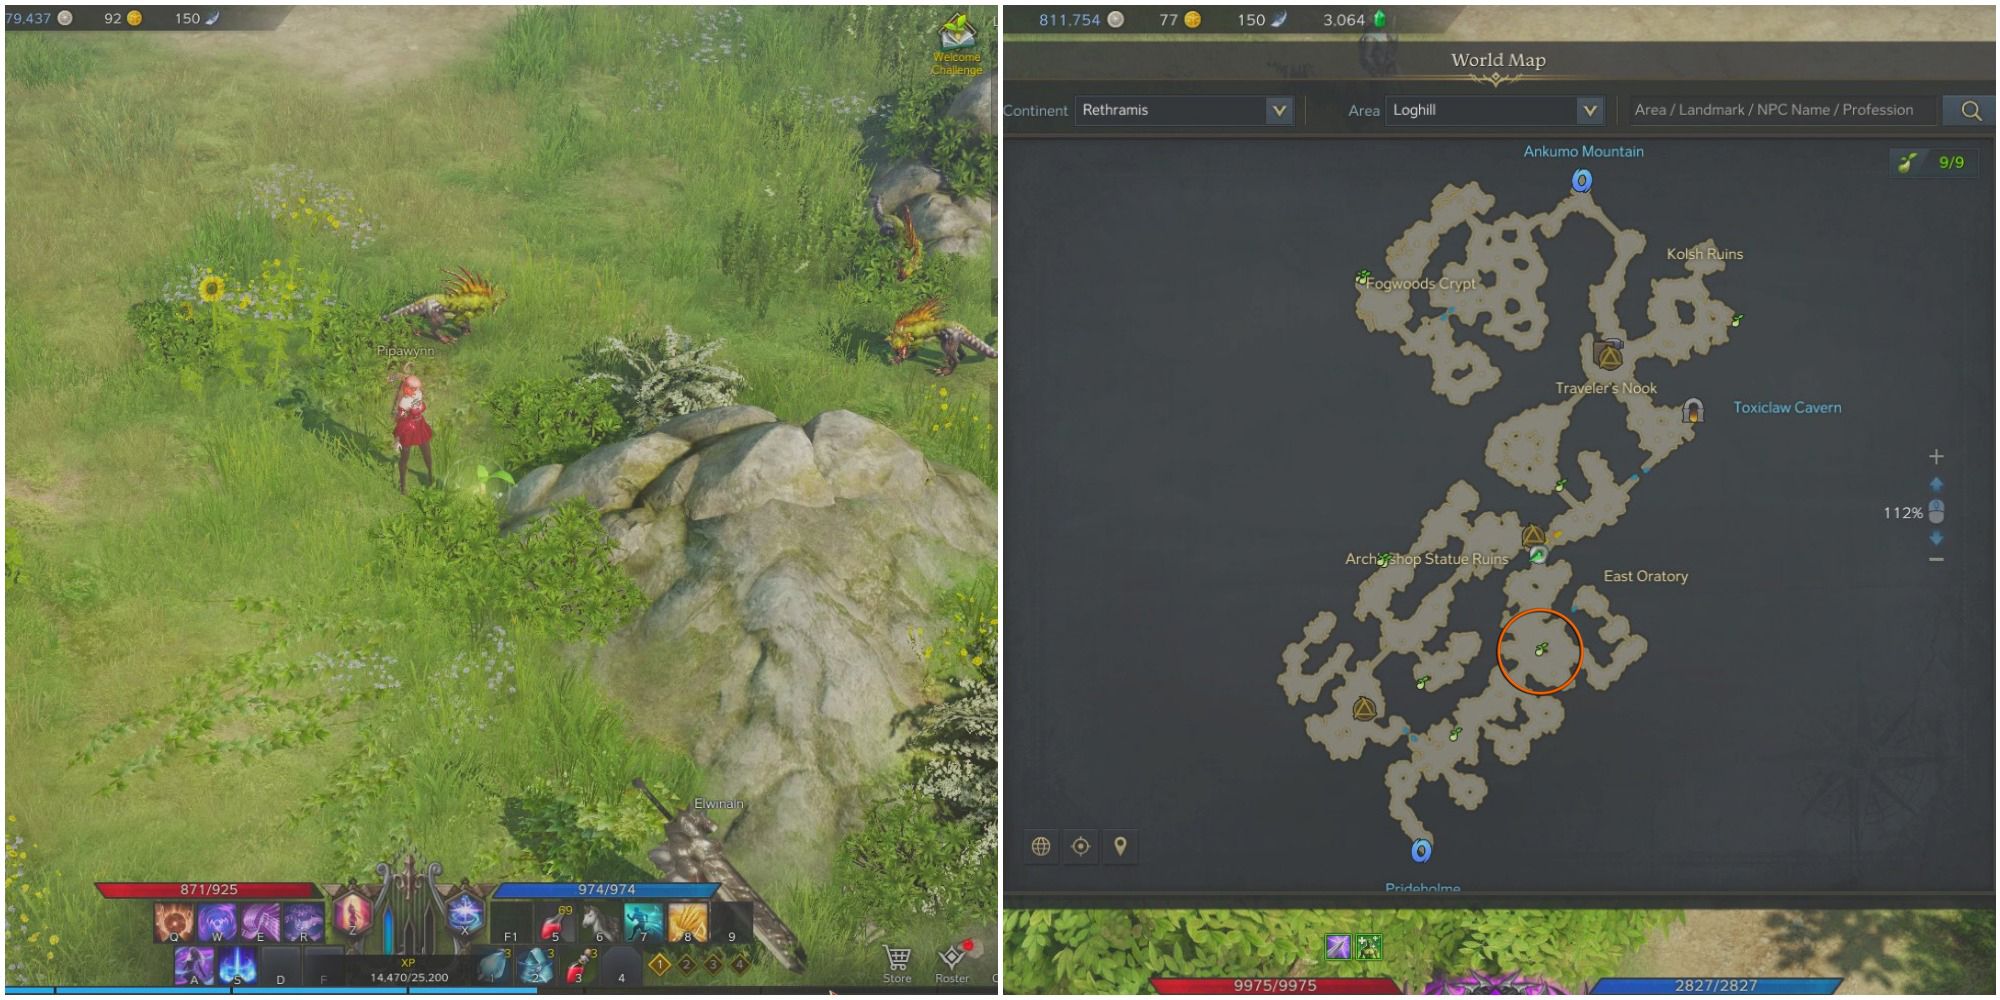 A split image of a bard standing next to a mokoko seed by a stone outcrop and a map of Loghill